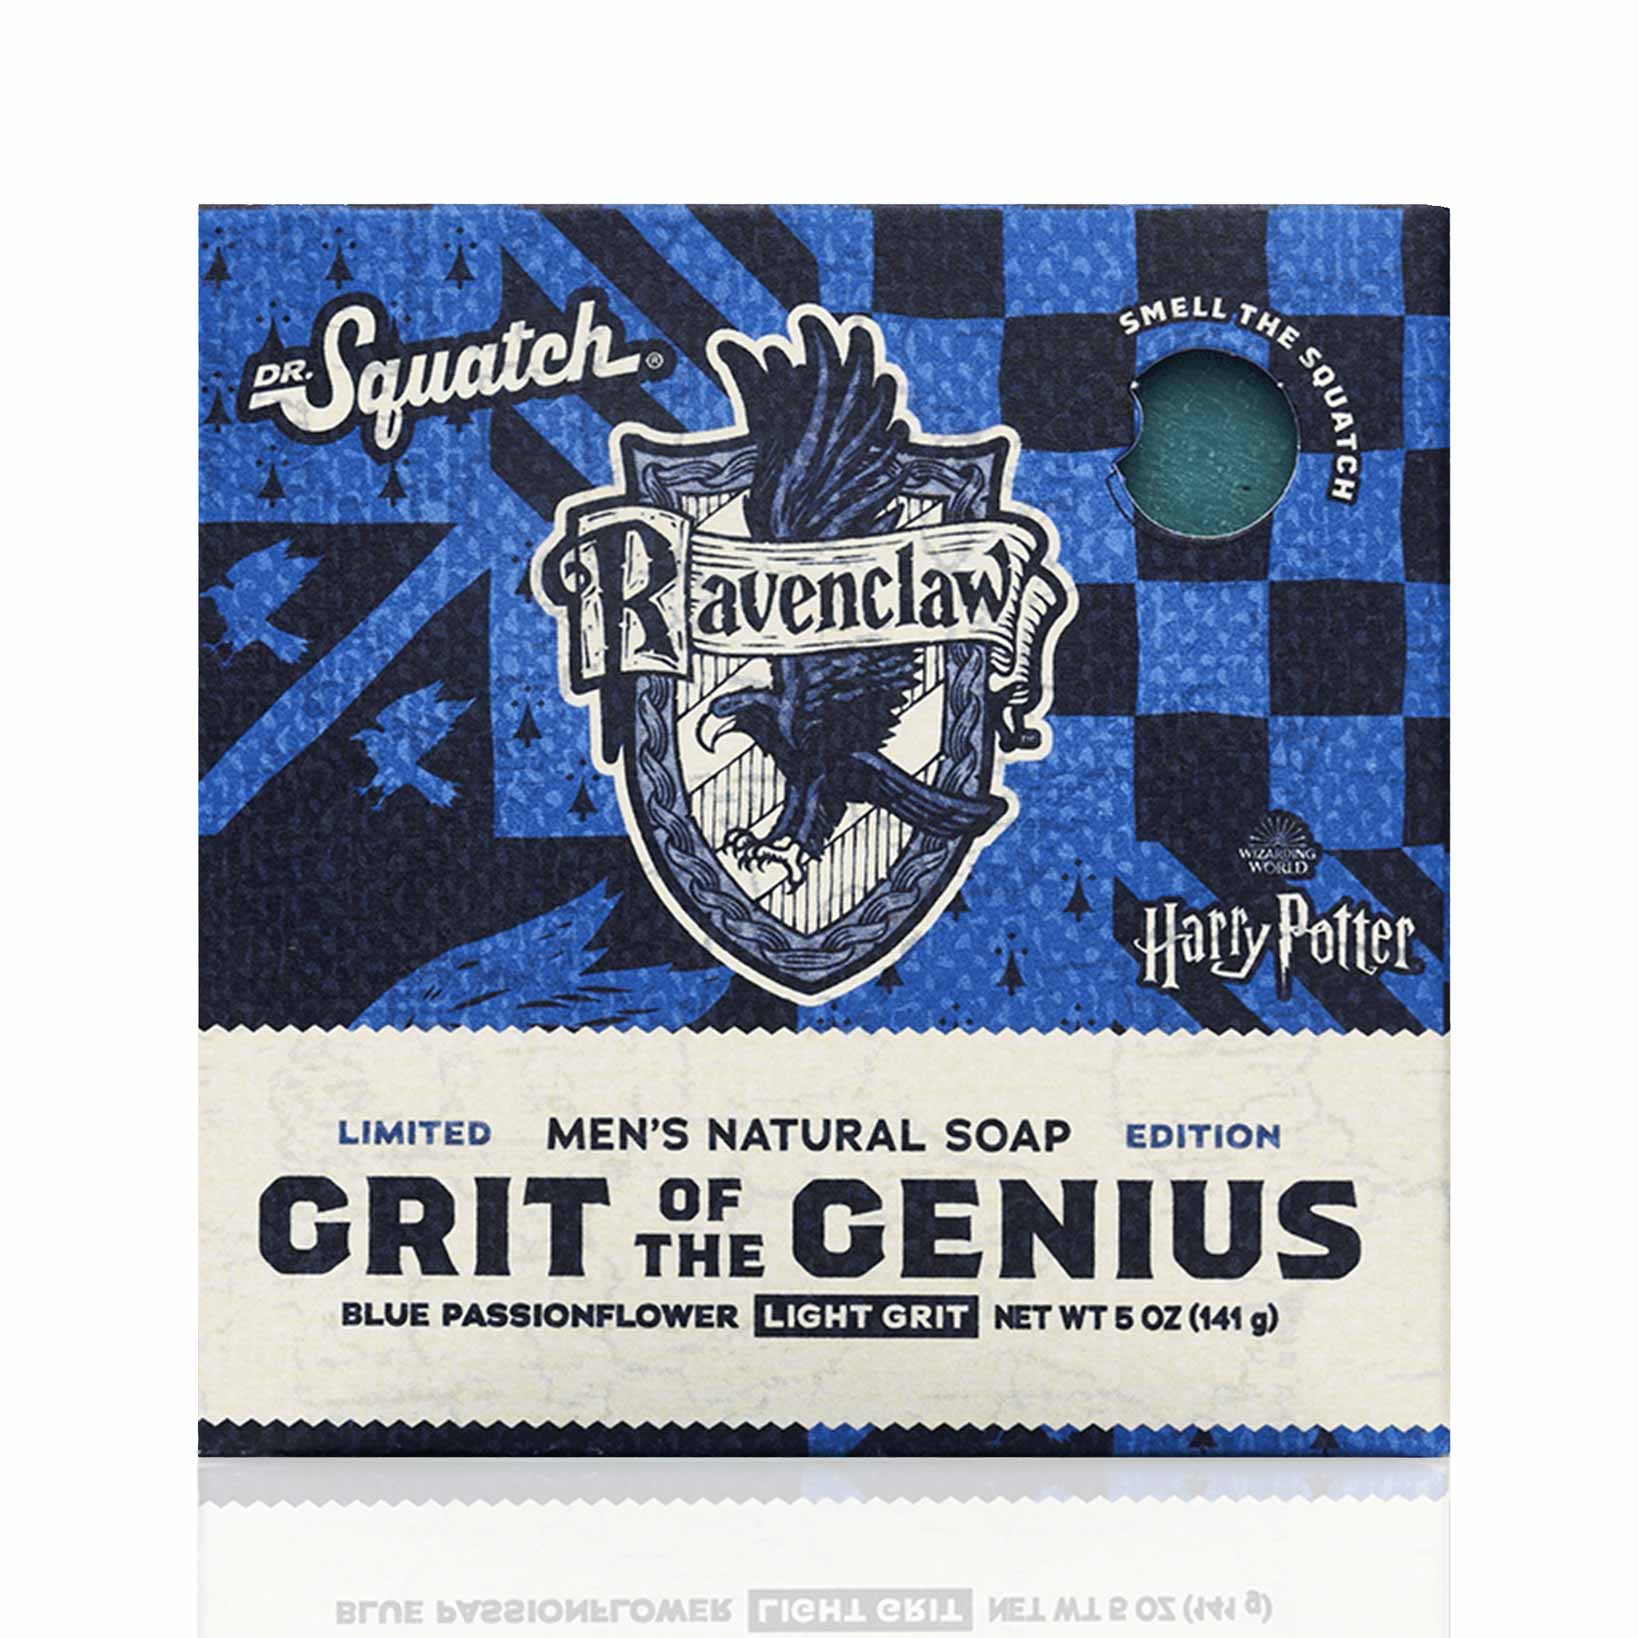 Dr. Squatch Soap Co. Men’s, Natural Exfoliating Soap Bar for Men, 4 PACK  scents in main photo